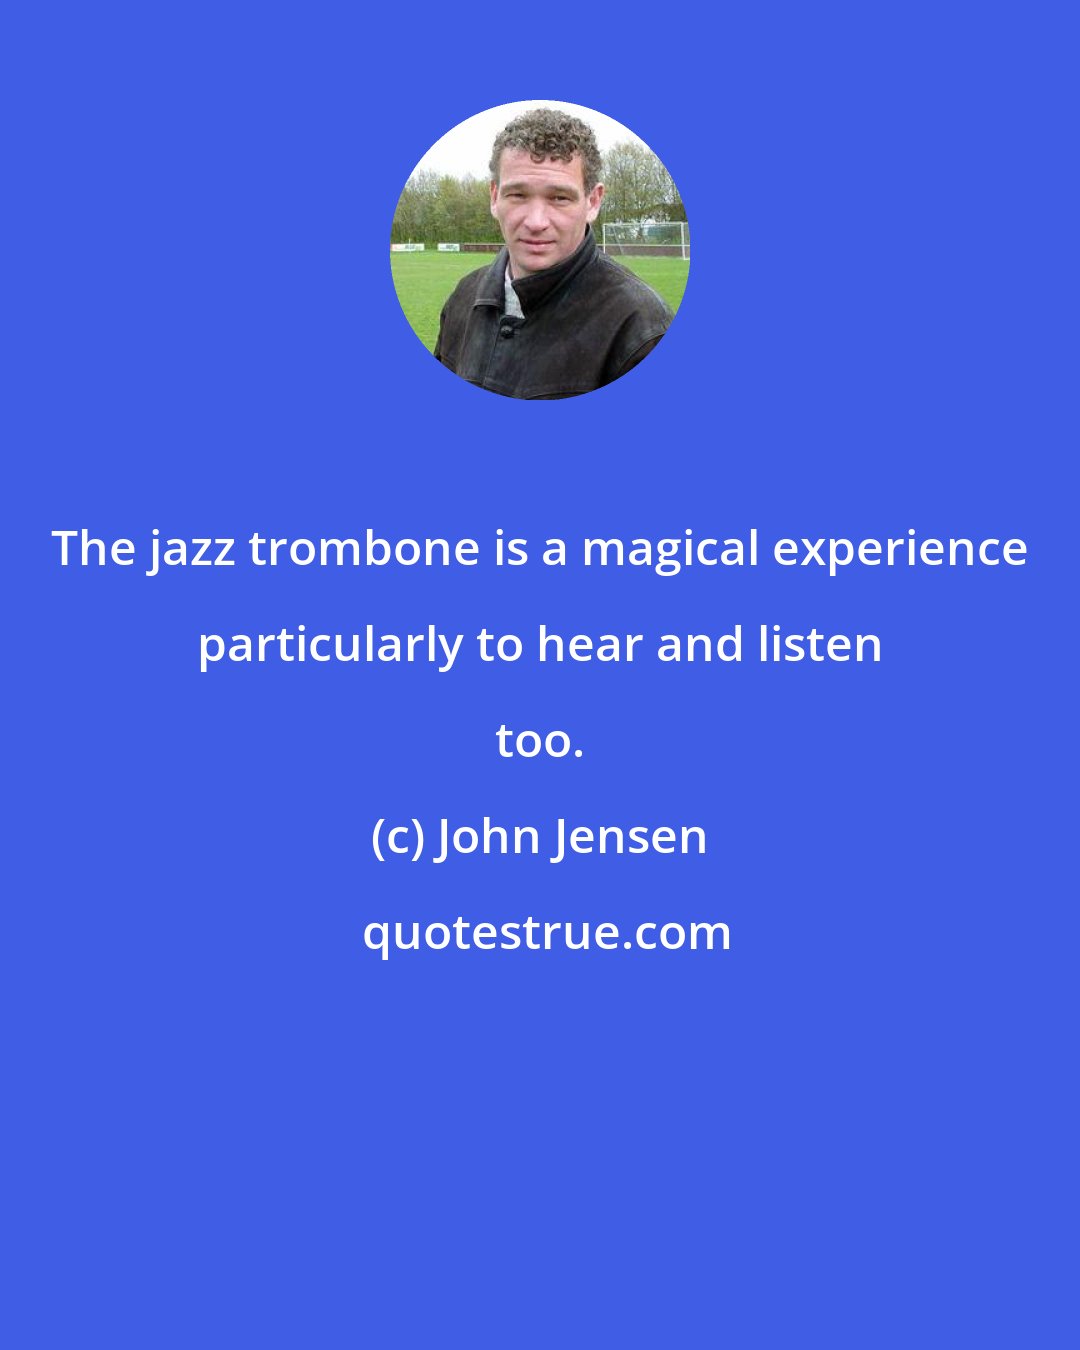 John Jensen: The jazz trombone is a magical experience particularly to hear and listen too.